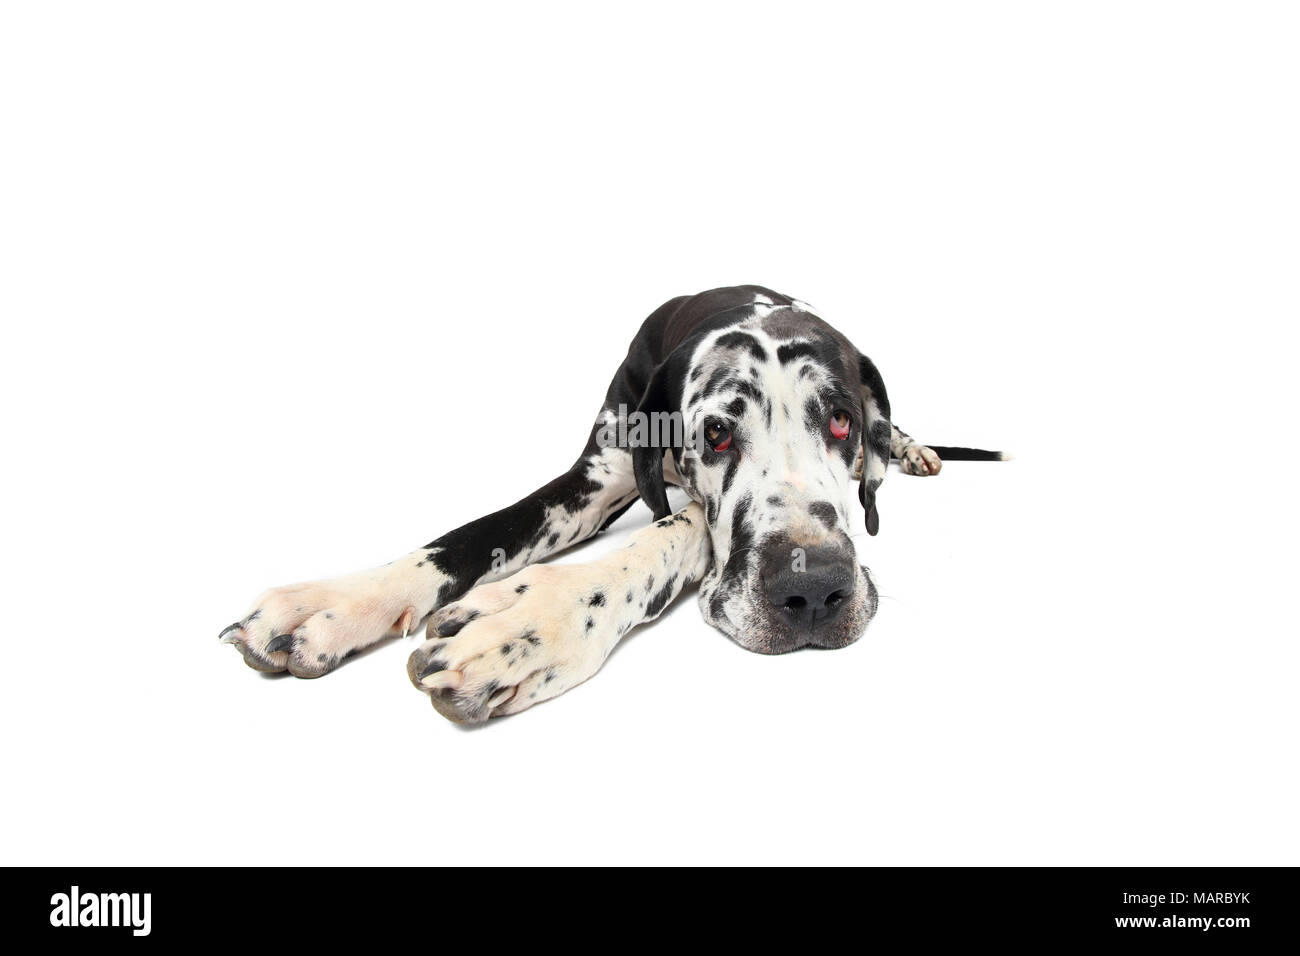 Great Dane. Adult bitch lying, seen head-on. Studio picture against a white background. Germany Stock Photo